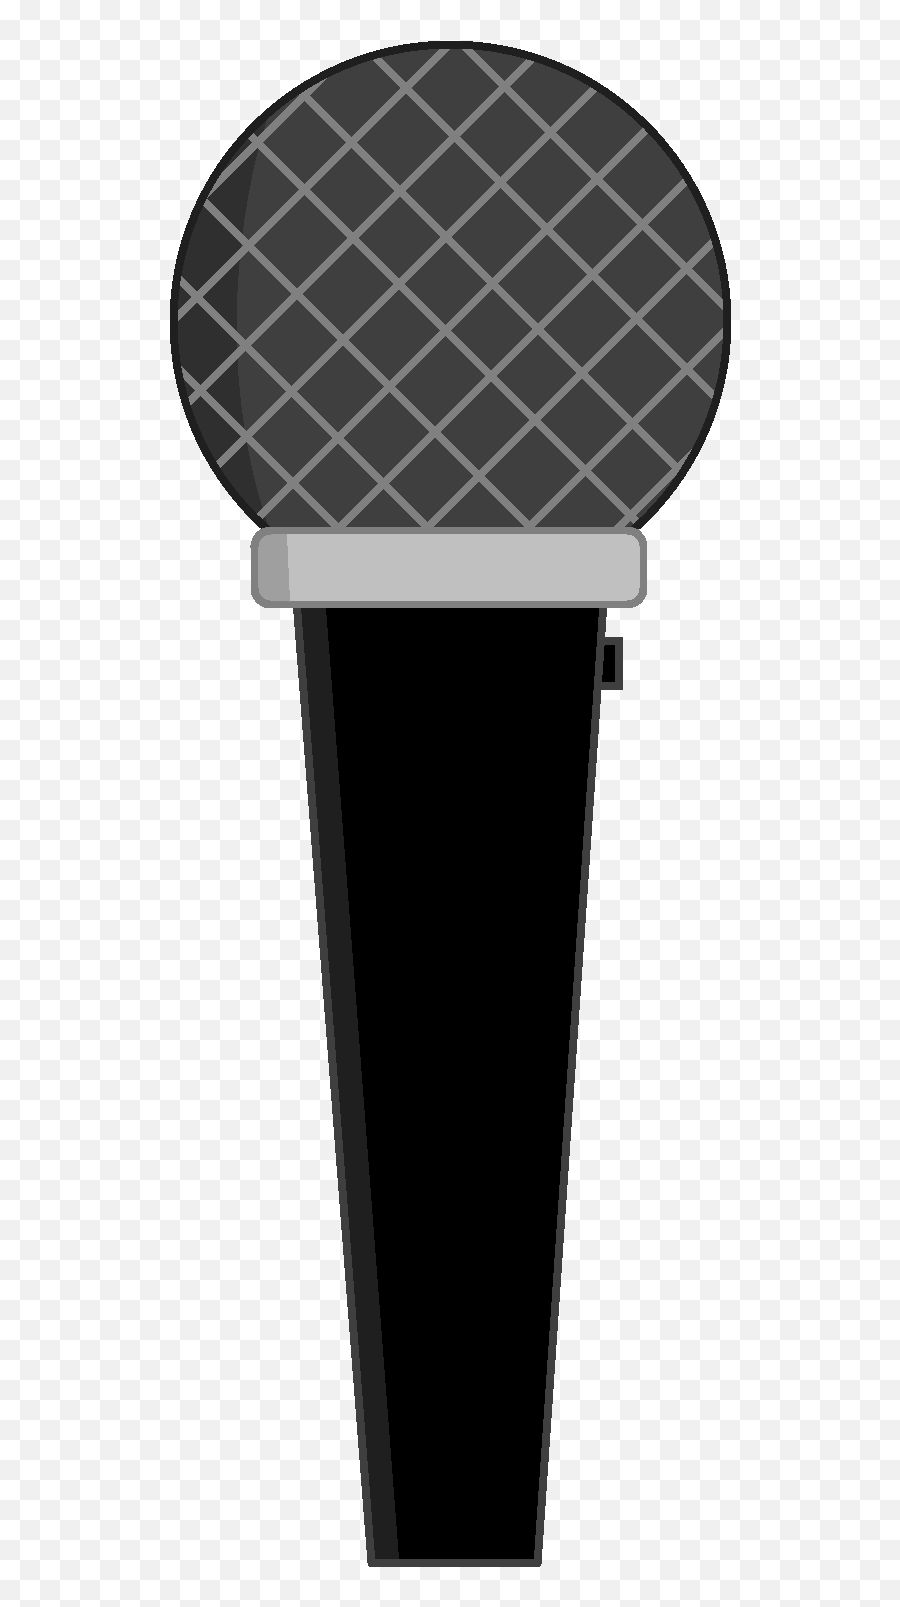 Download Hd Microphone Icon - Microphone Object Oppose Emoji,Microphone Icon Png